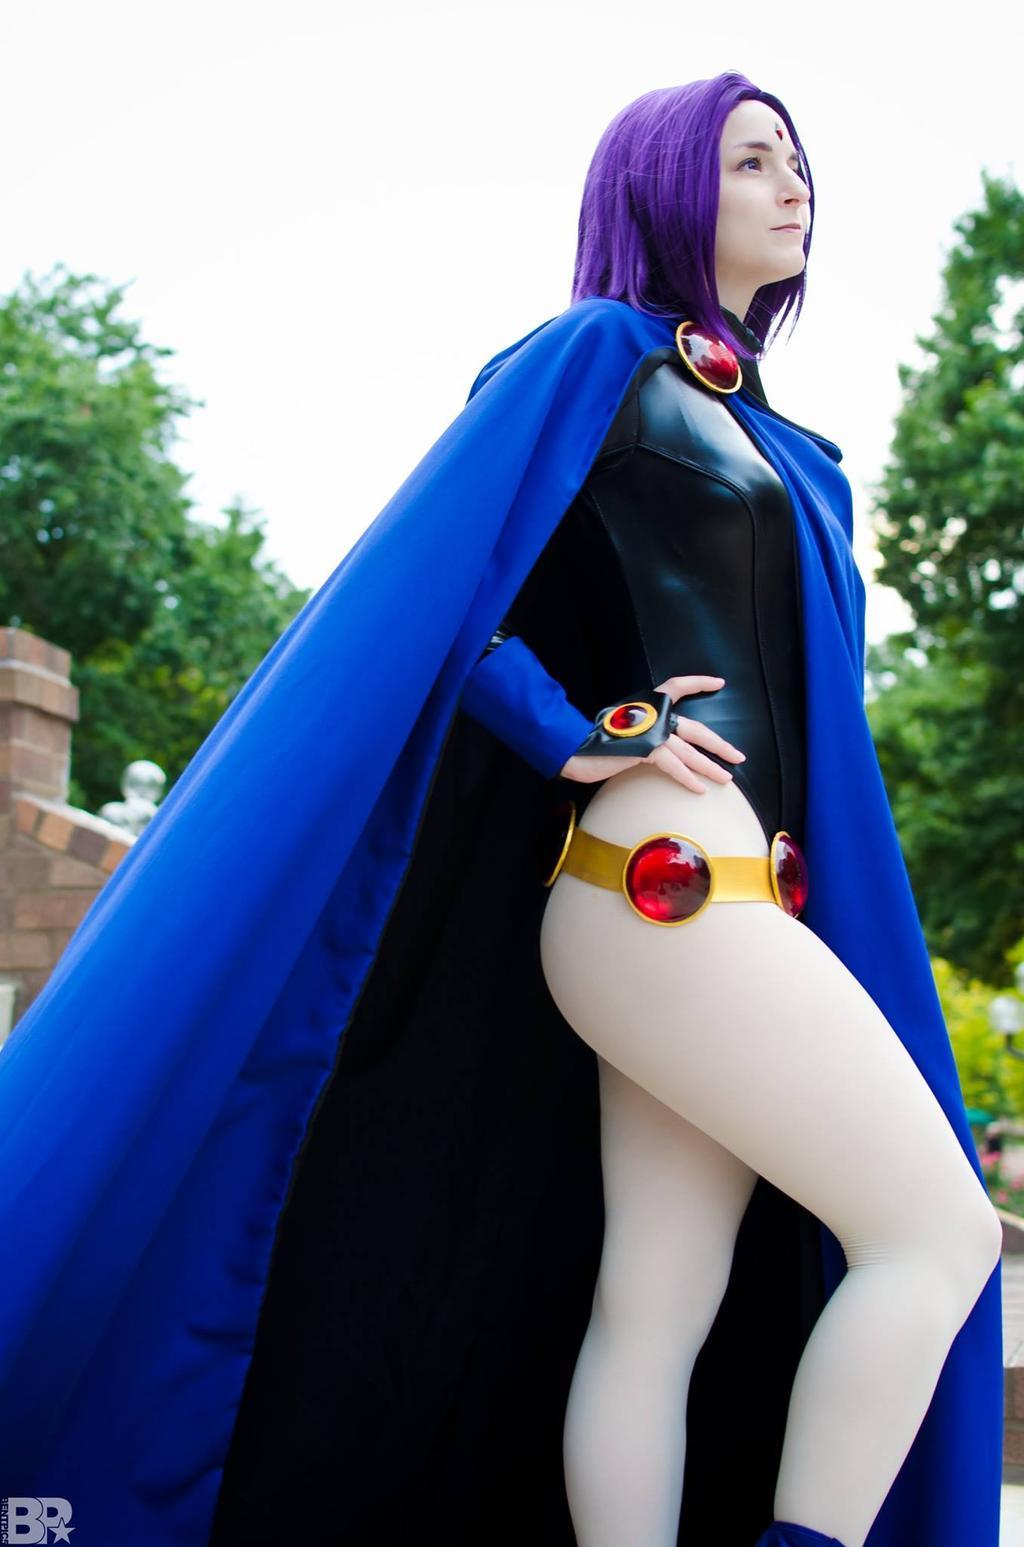 50+ Hot Pictures Of Raven From Teen Titans, DC Comics. 23